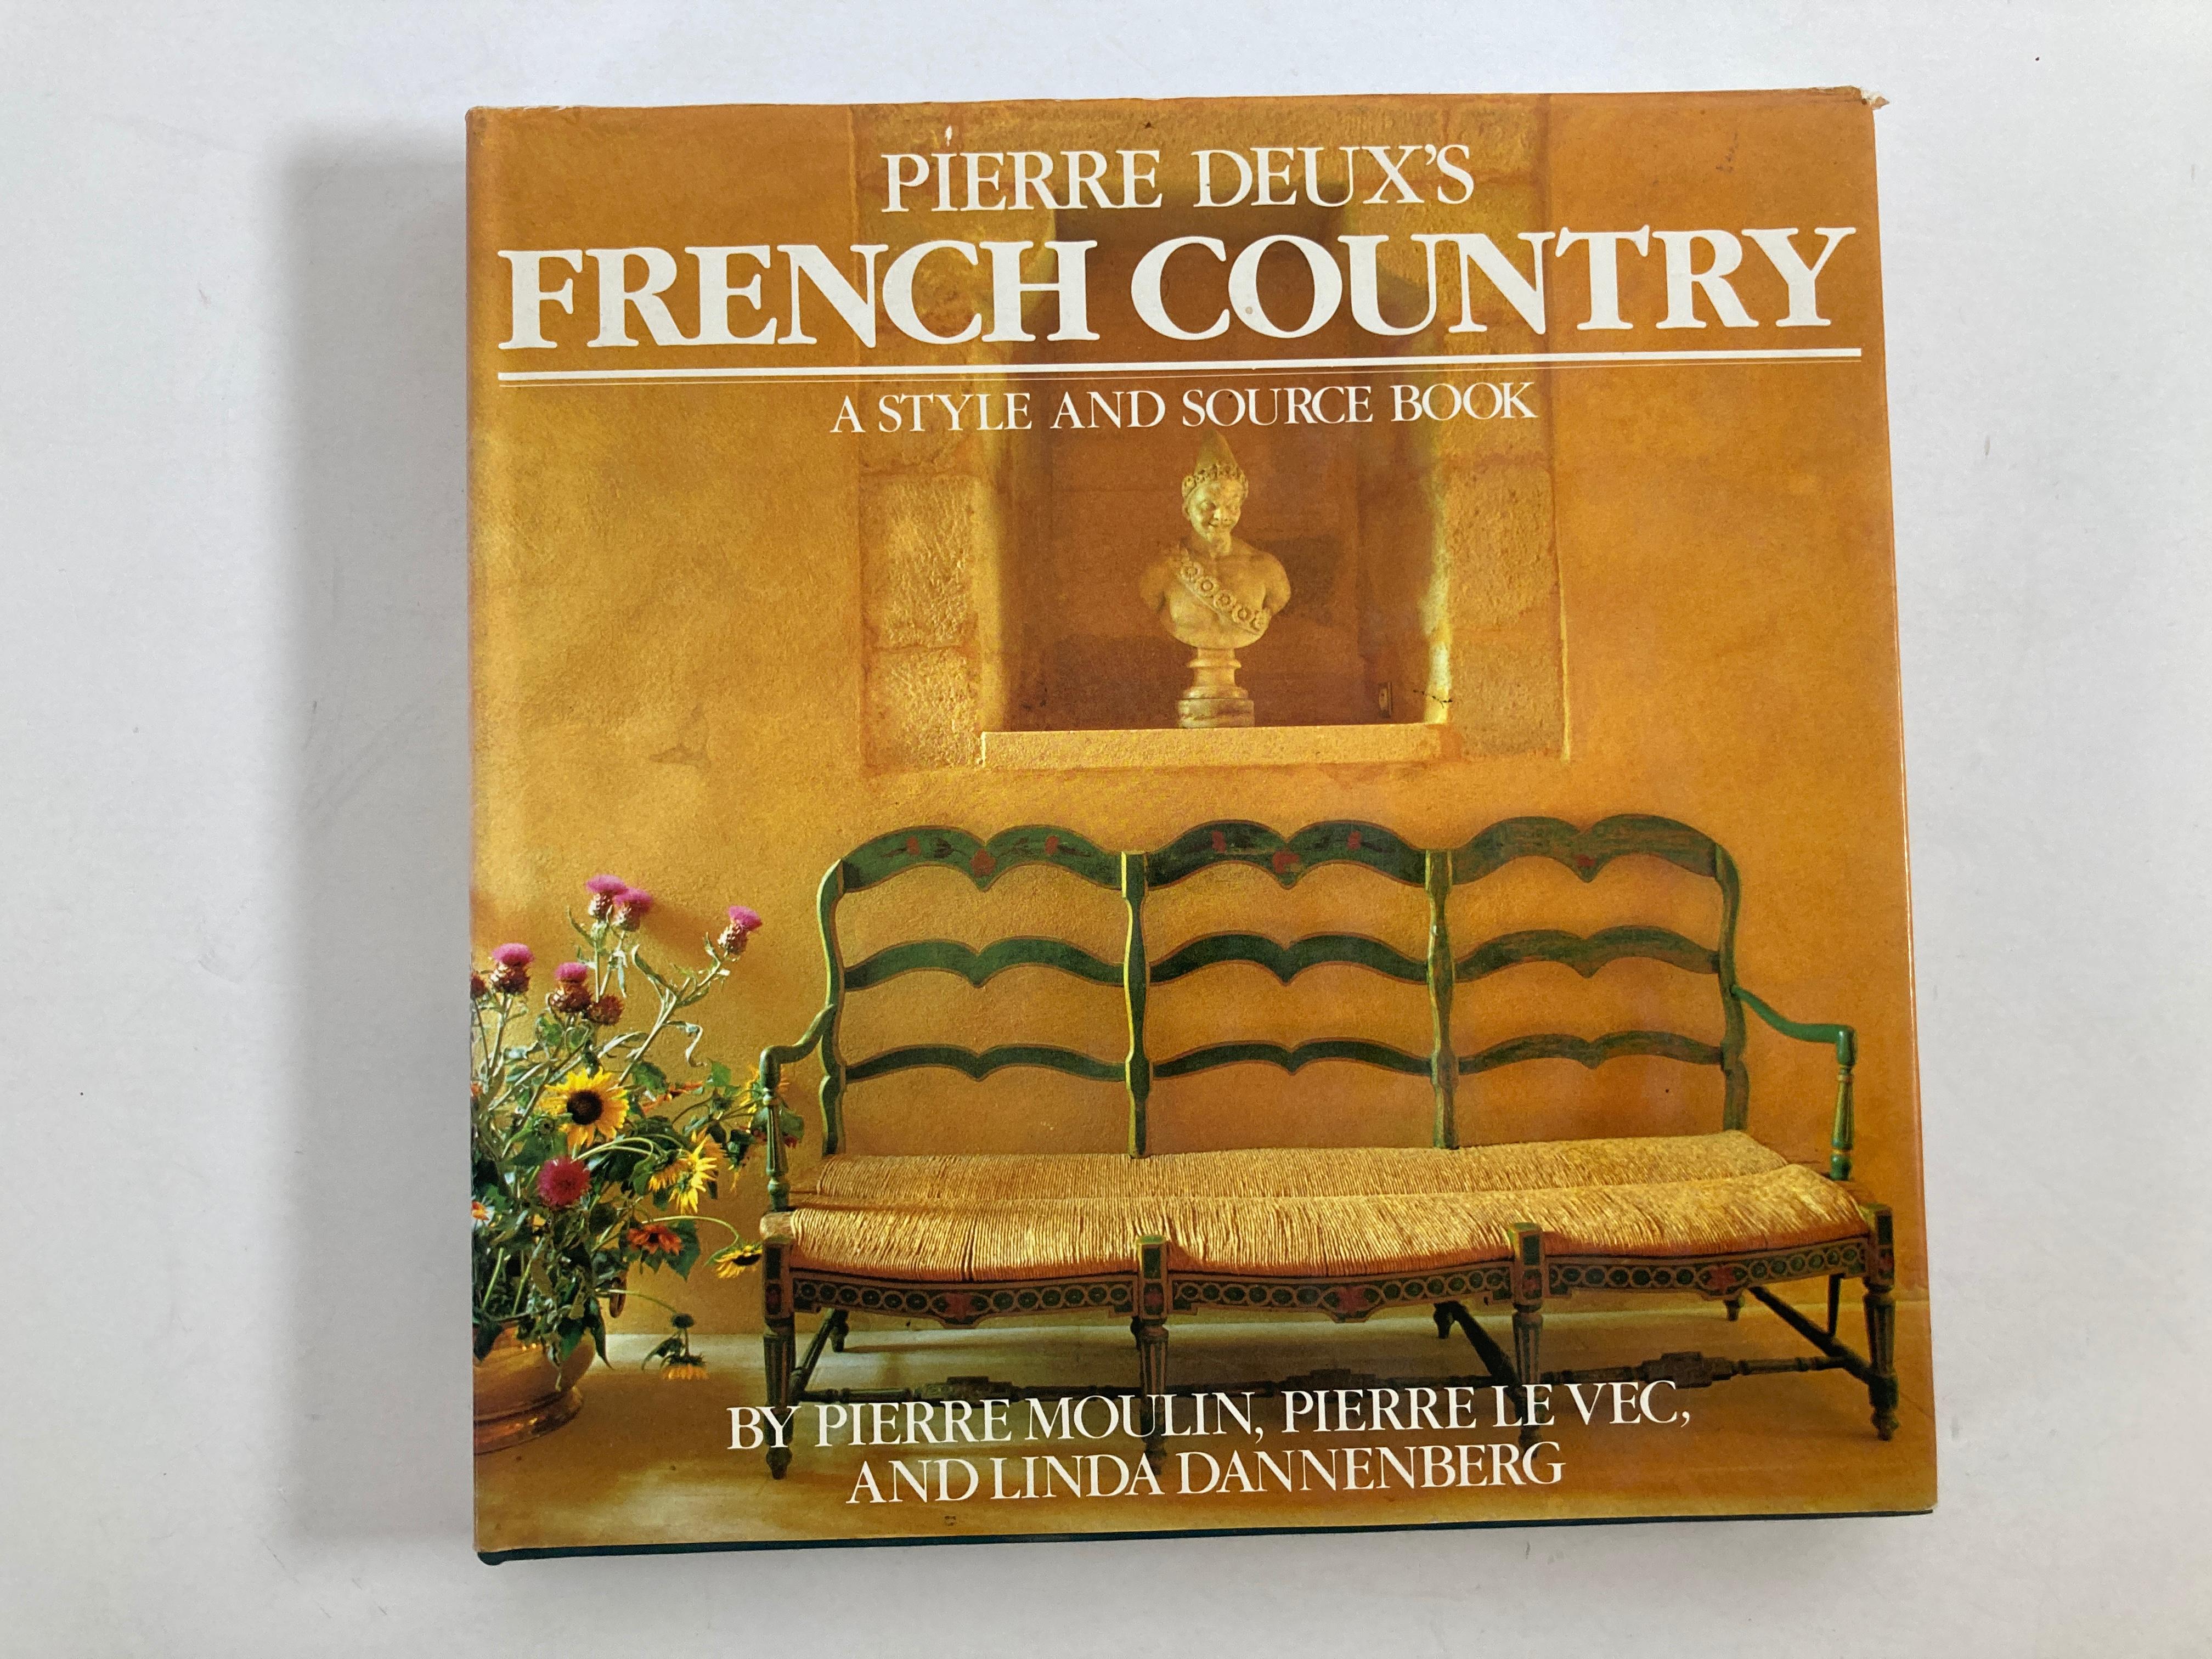 PIERRE DEUX'S FRENCH COUNTRY
Moulin, Pierre - Le Vec, Pierre - Dannenberg, Linda - BOUCHET, GUY - HARDY, PAUL
Published by New York: Clarkson N. Potter, Inc., 
1st Edition 1984
What has come to be known as the French Country look is really the